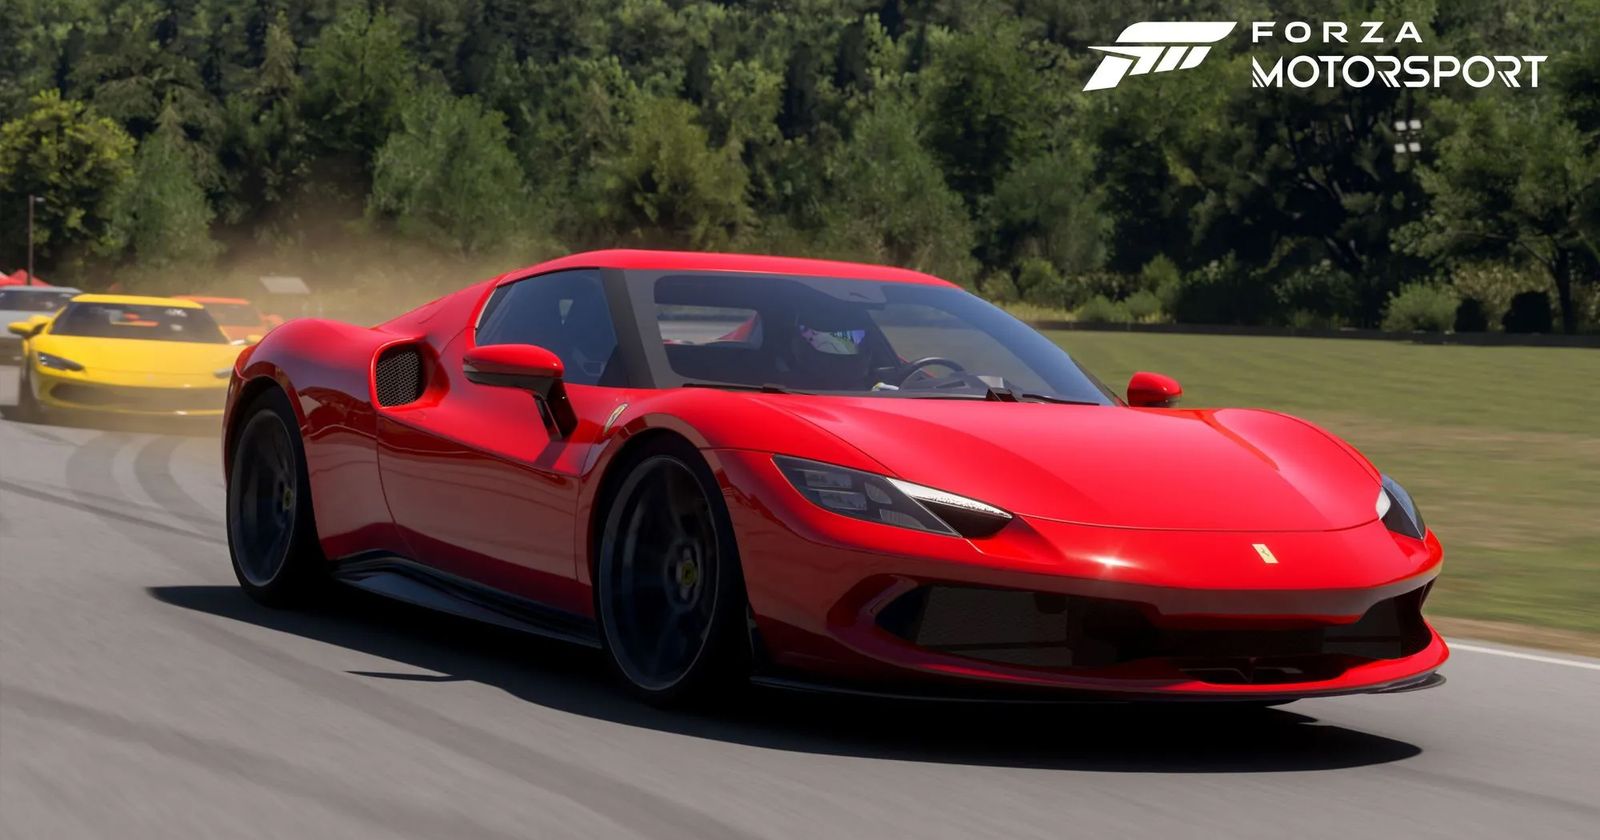 39 New Forza 6 Cars Confirmed - GameSpot